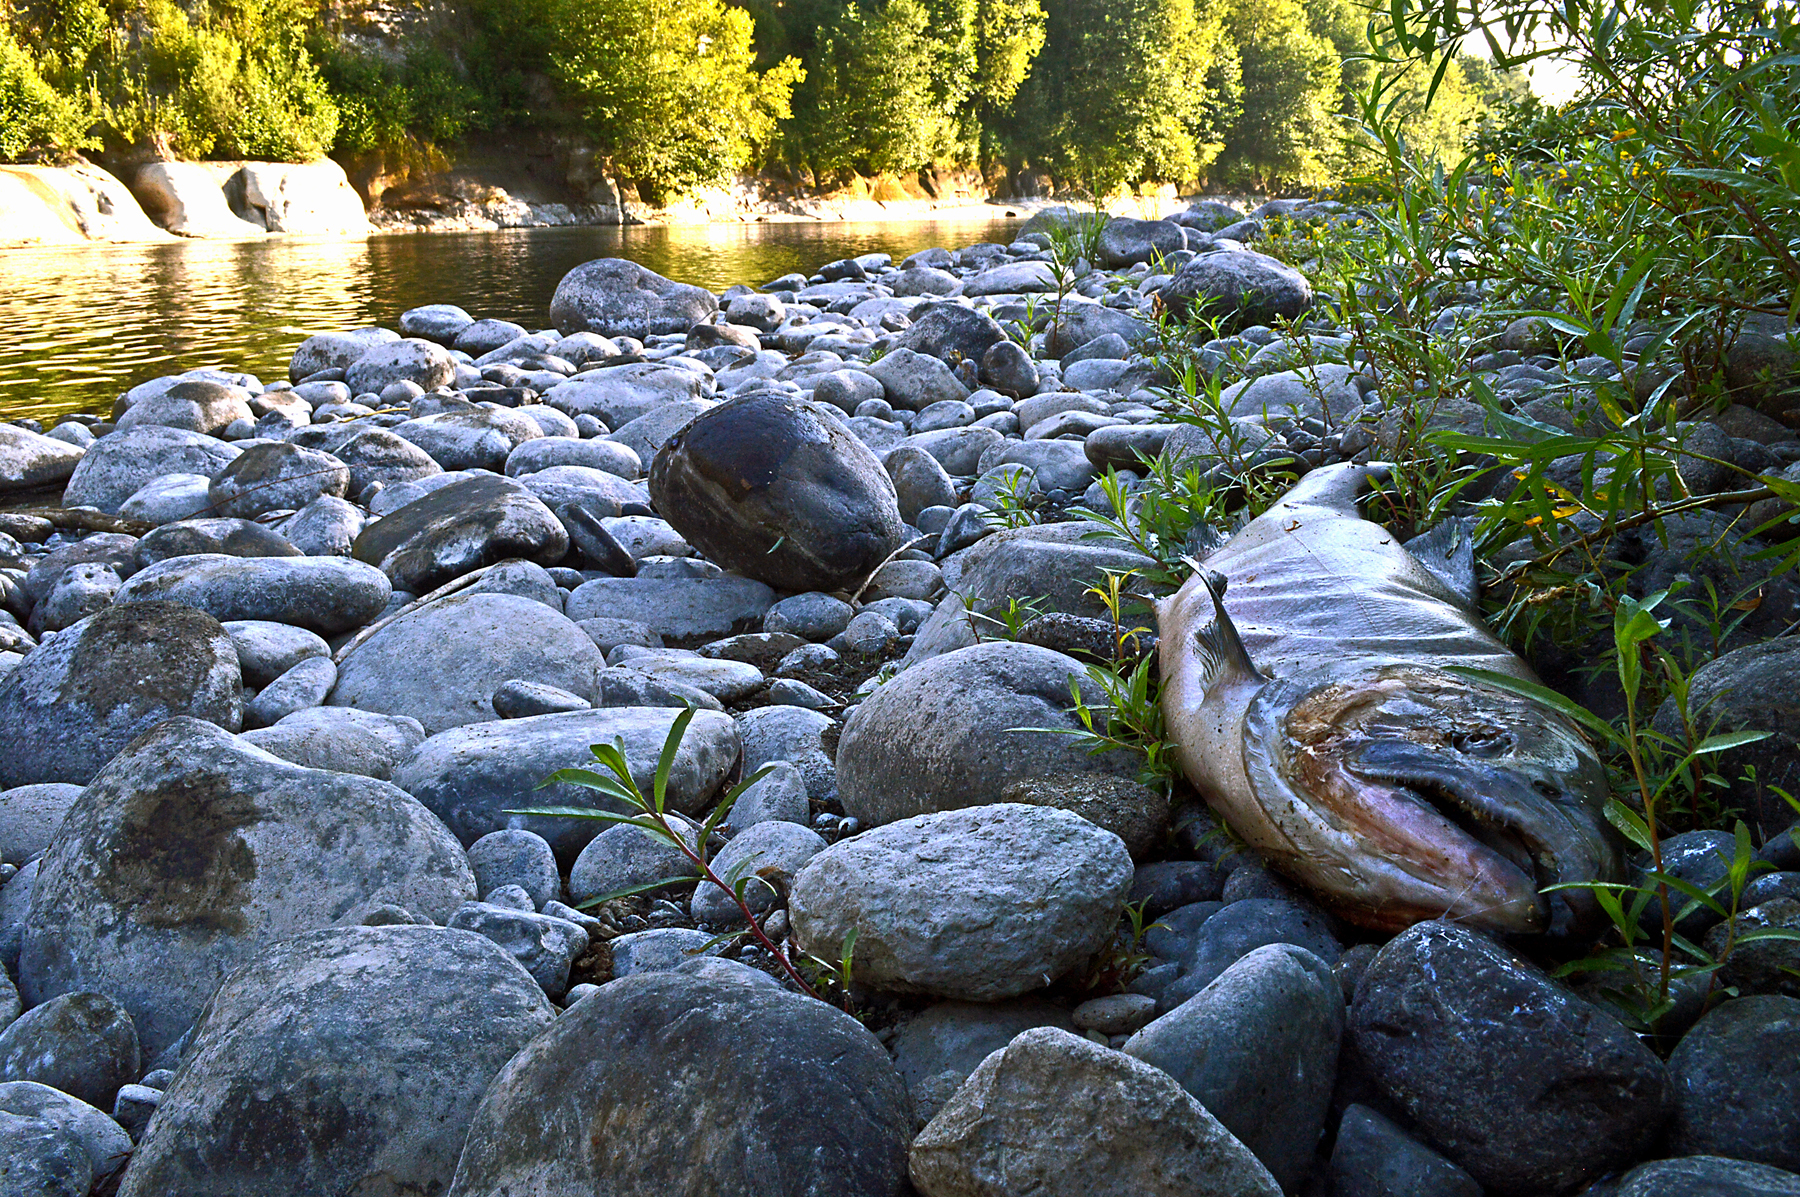 Oregon could ditch catch limits and make other fishing regulation changes  because of drought - OPB